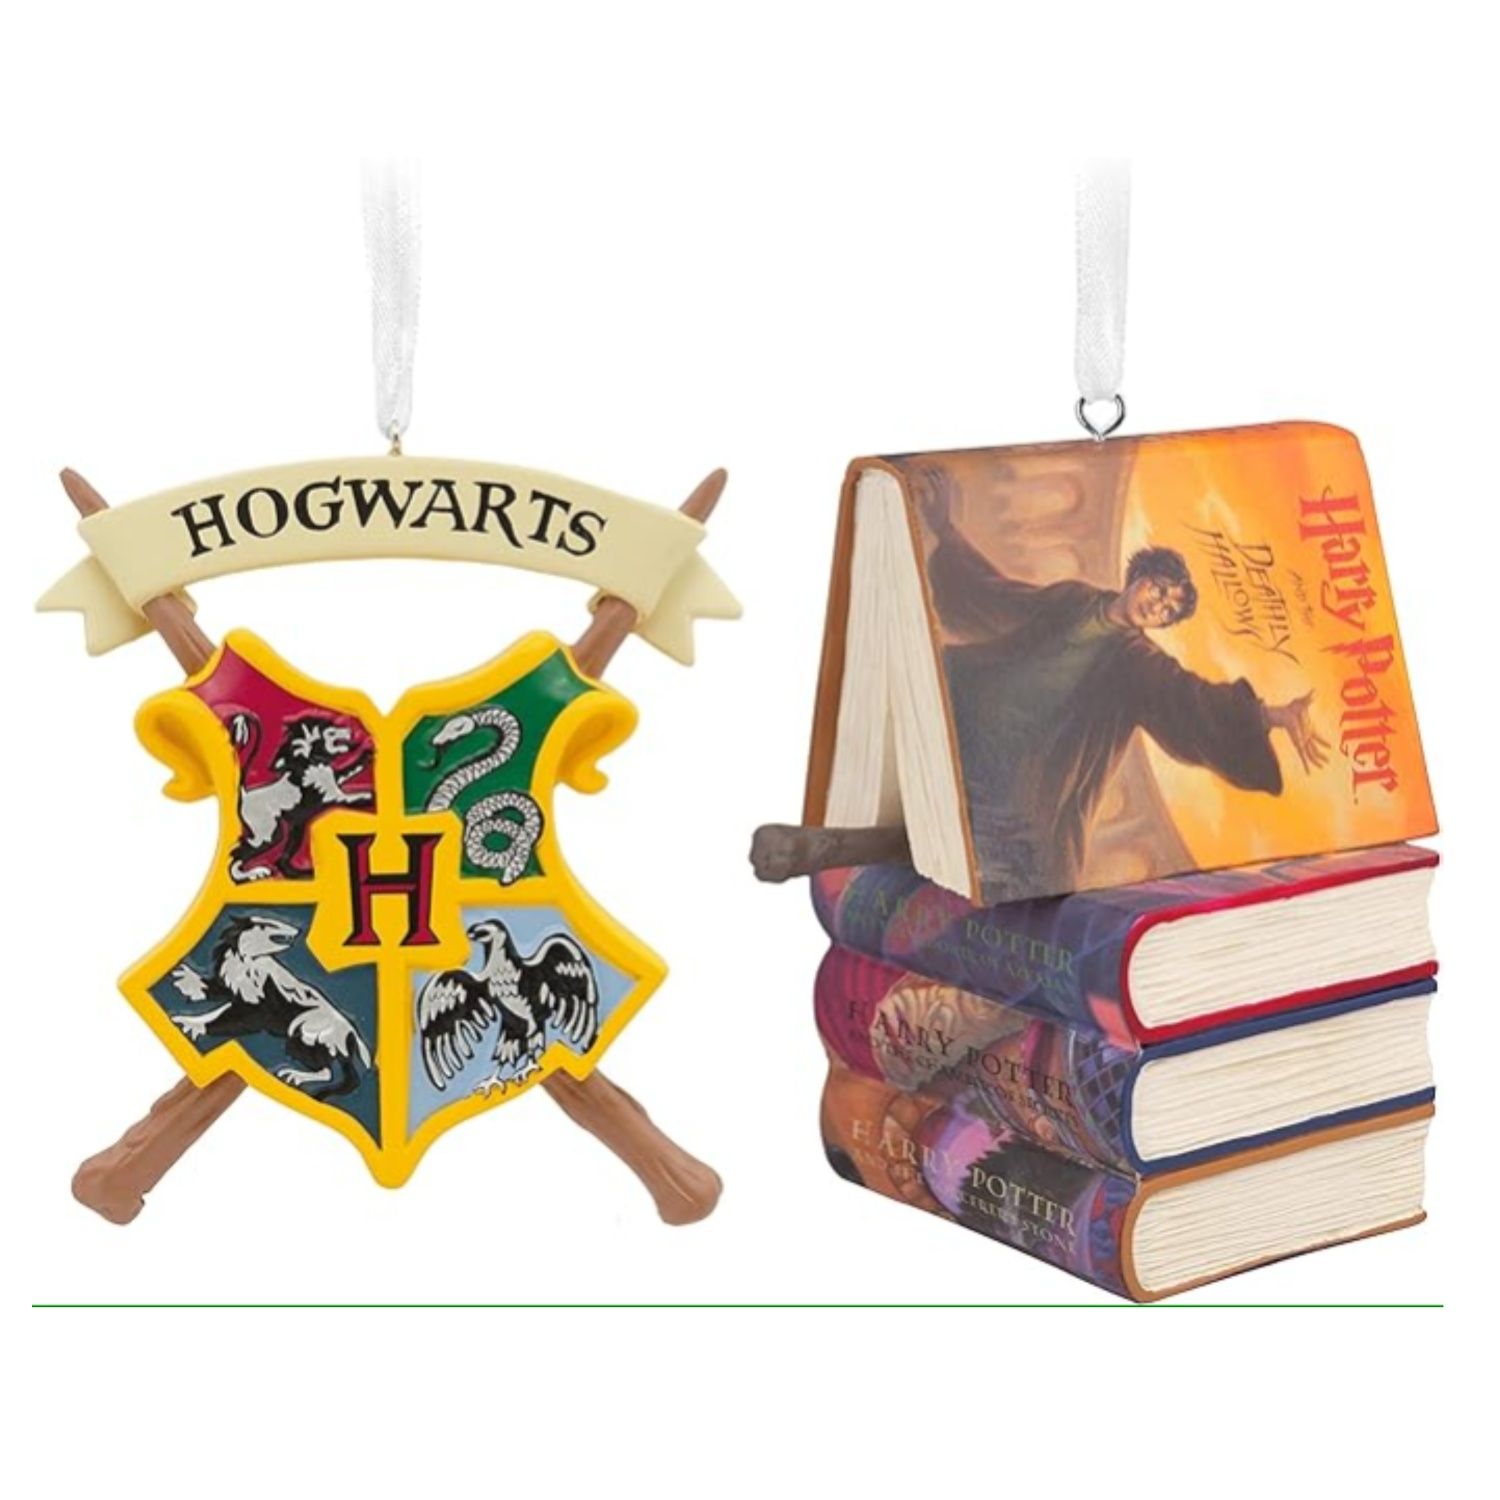 This image shows two Harry Potter ornaments: one is the Hogwarts crest and the second is a stack of the books with a wand between one of them